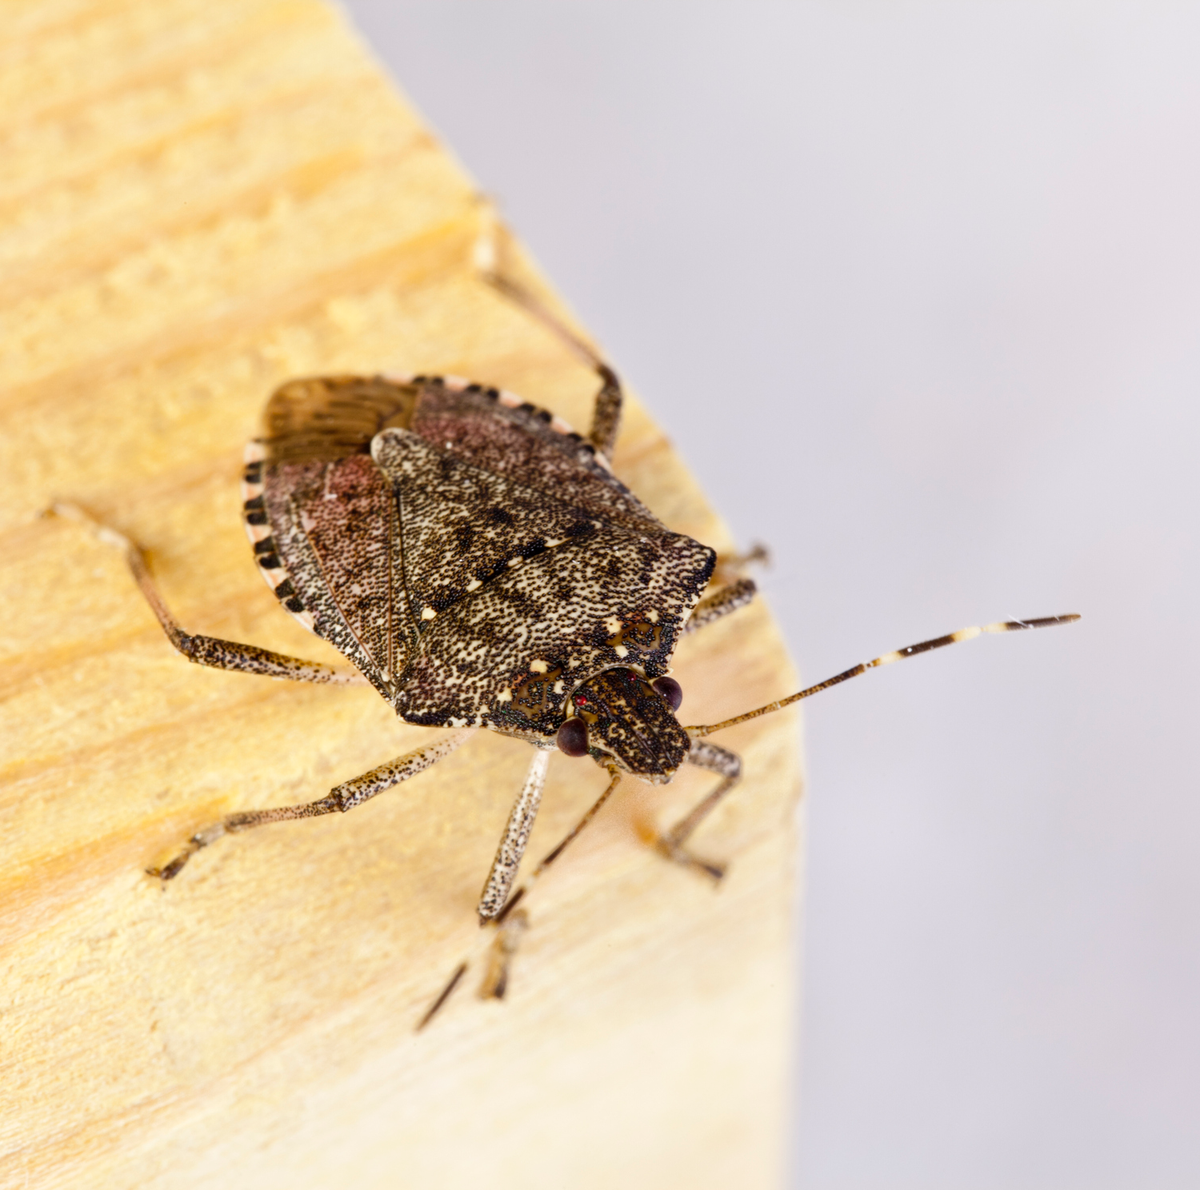 What Do Stink Bugs Smell Like and Why Do They Emit Odor?